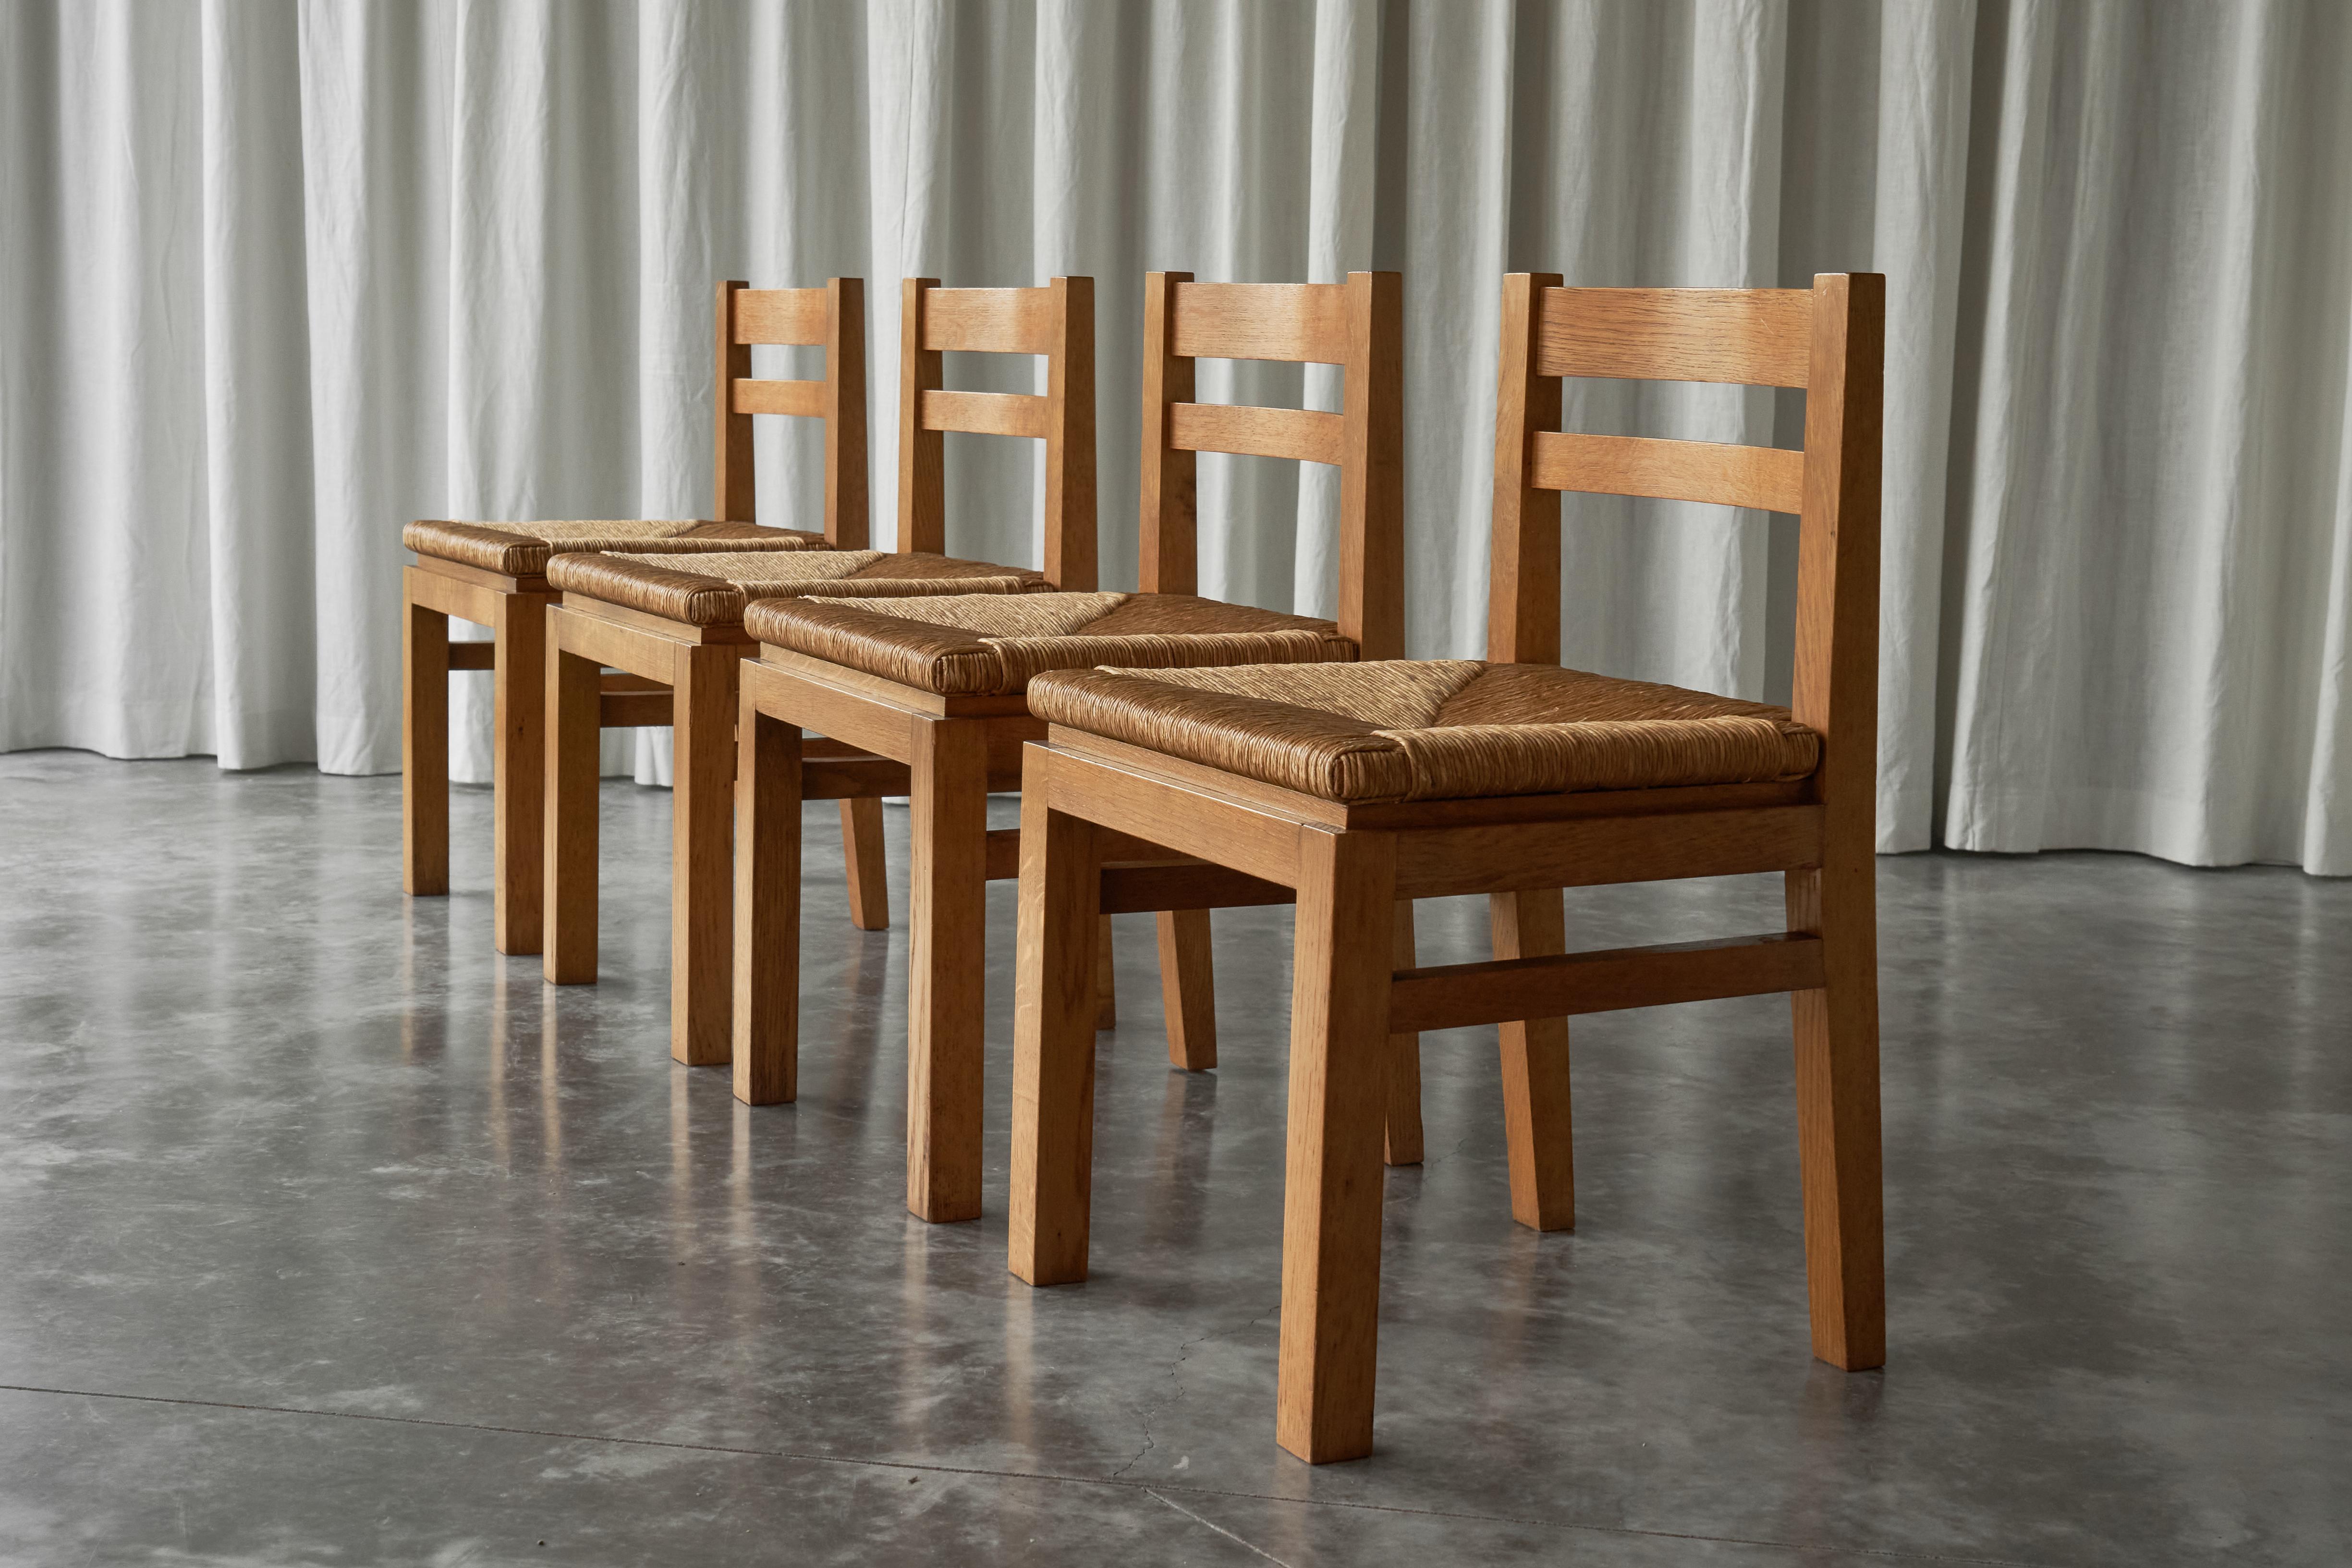 Set of 4 Mid Century Modernist Dining Chairs in Oak and Straw, Belgium, 1960s.

This remarkable set of four modernistic dining chairs comes from the first owner and is designed in the manner of the works by Belgian designer and art collector Emiel